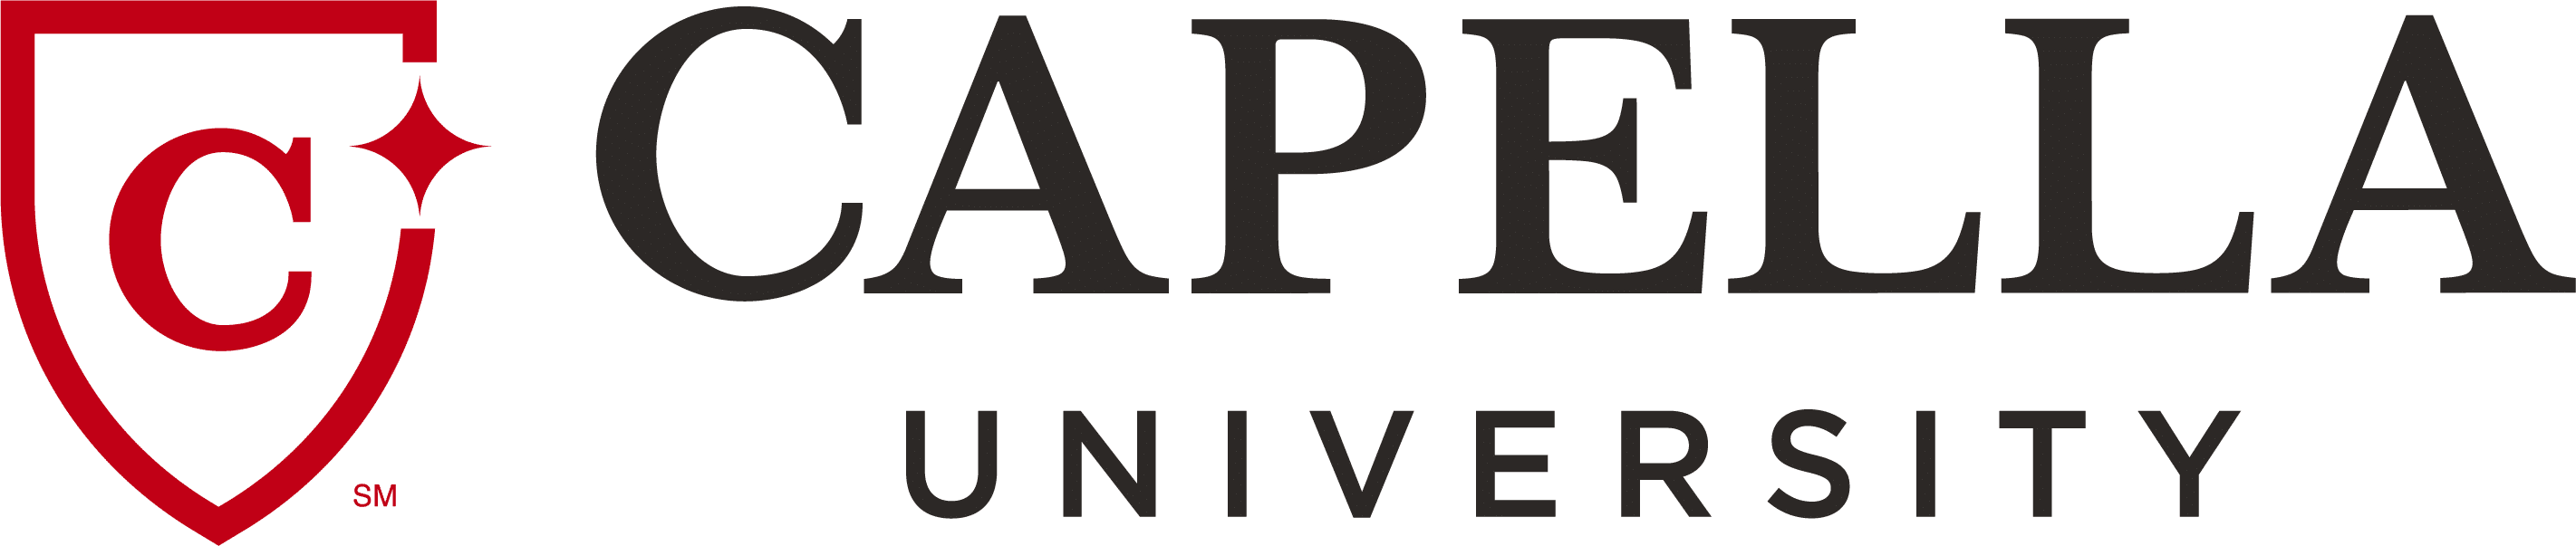 Master's Degree in Counseling Program at Capella University